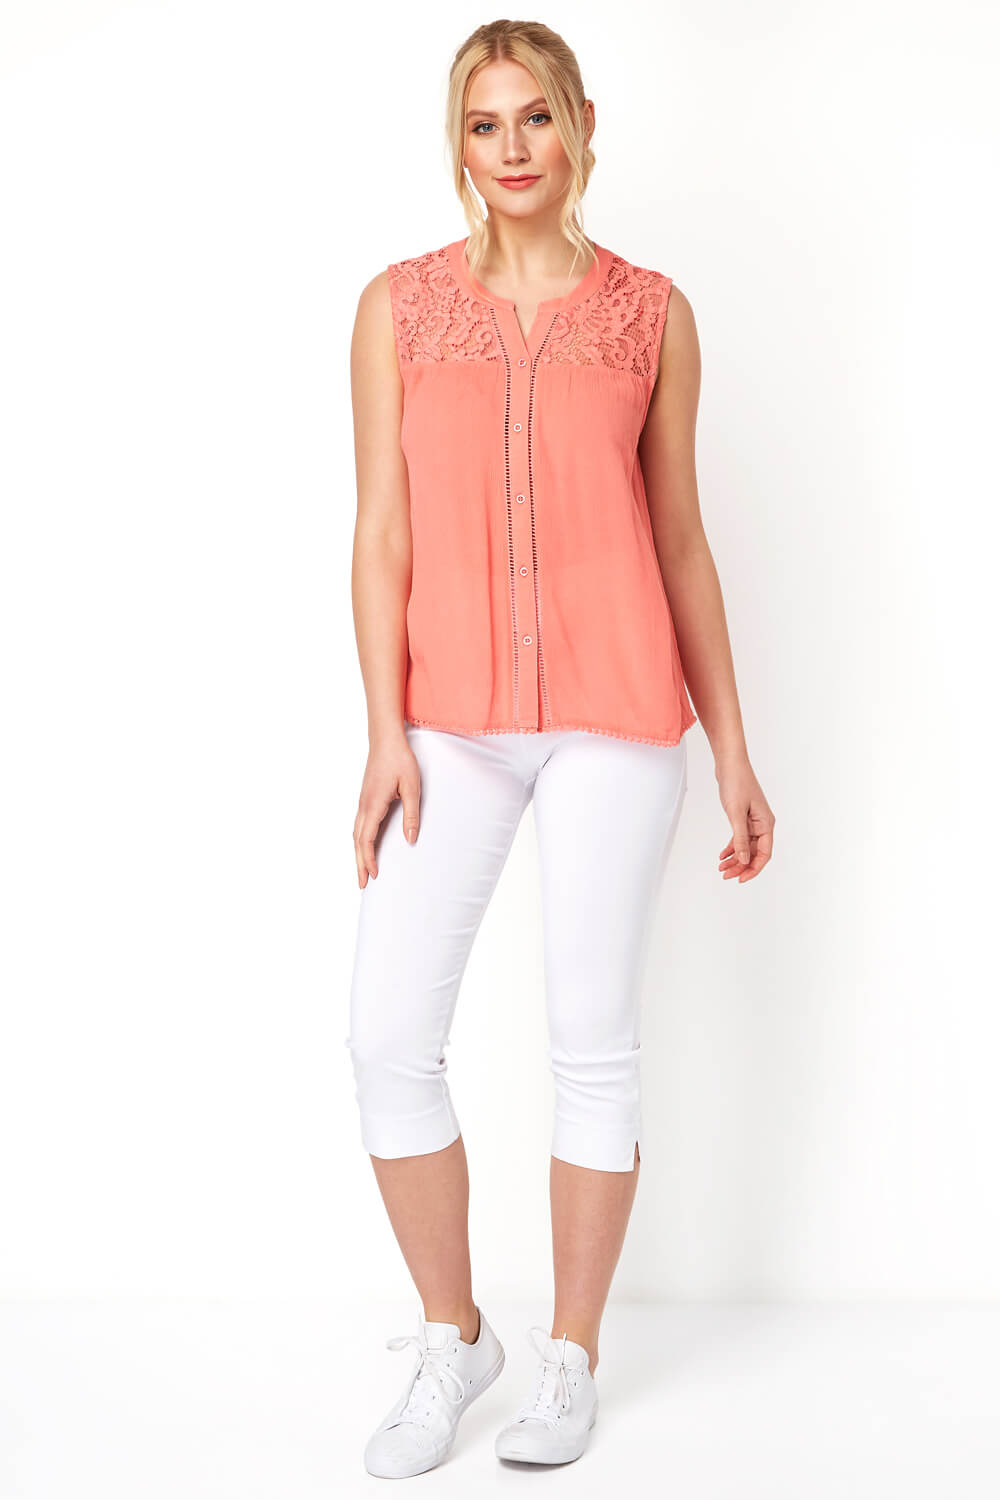 CORAL Lace Insert Button Up Blouse, Image 2 of 8